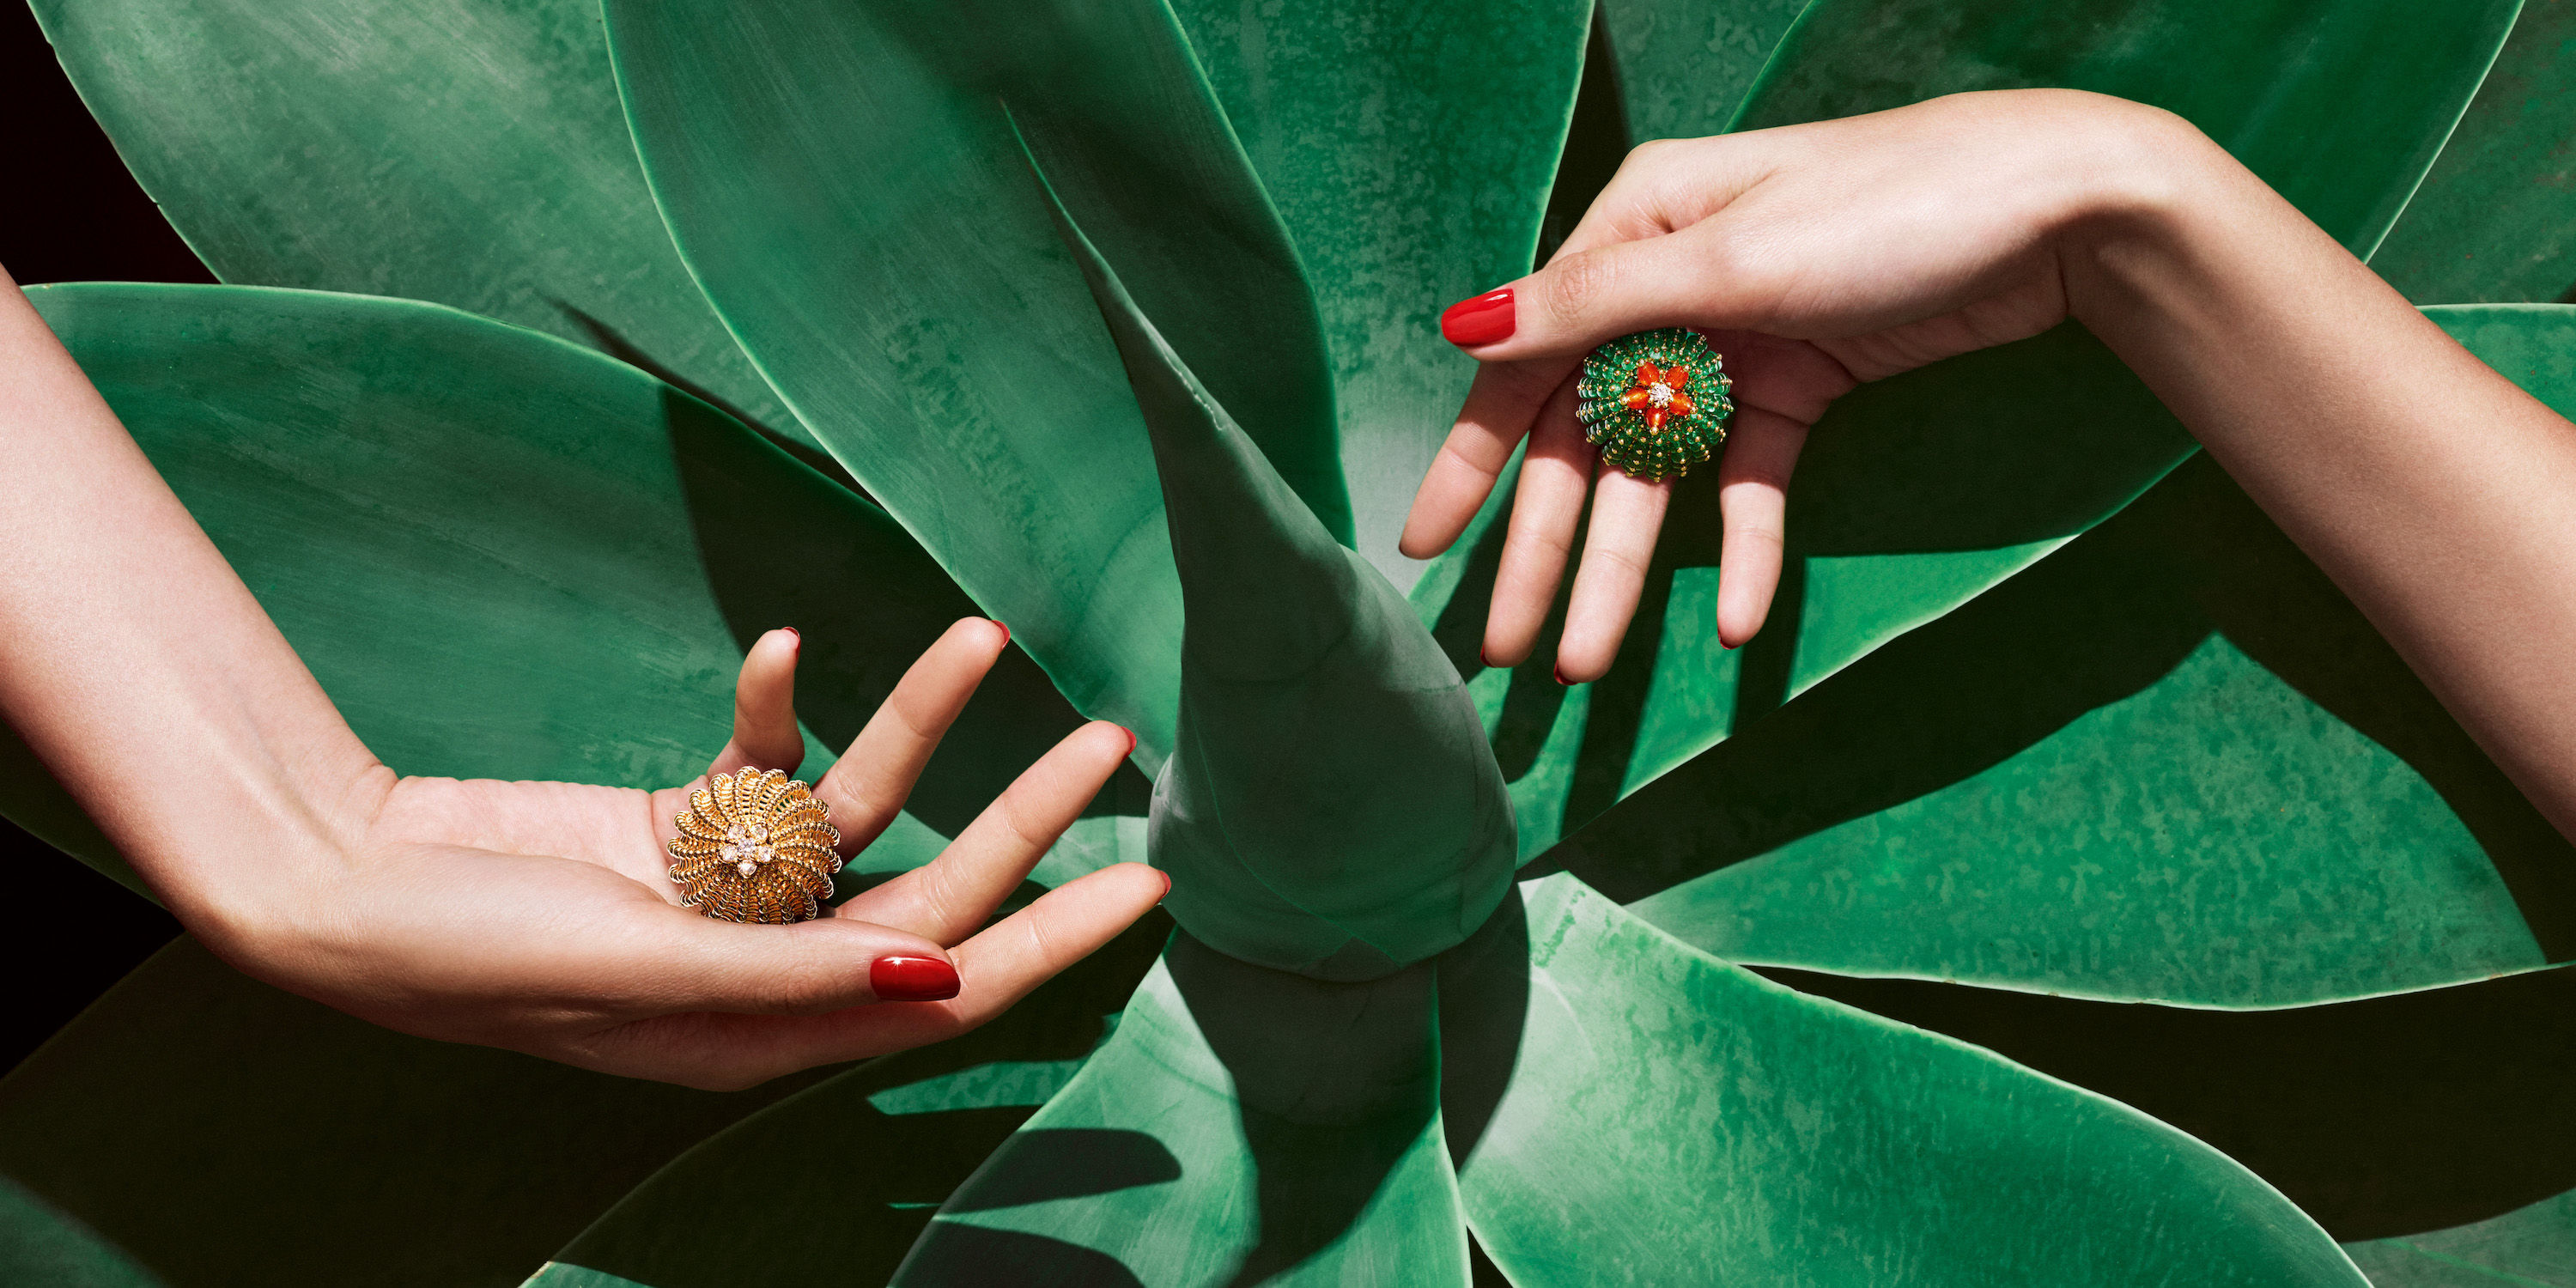 Cool down with the Cactus de Cartier collection